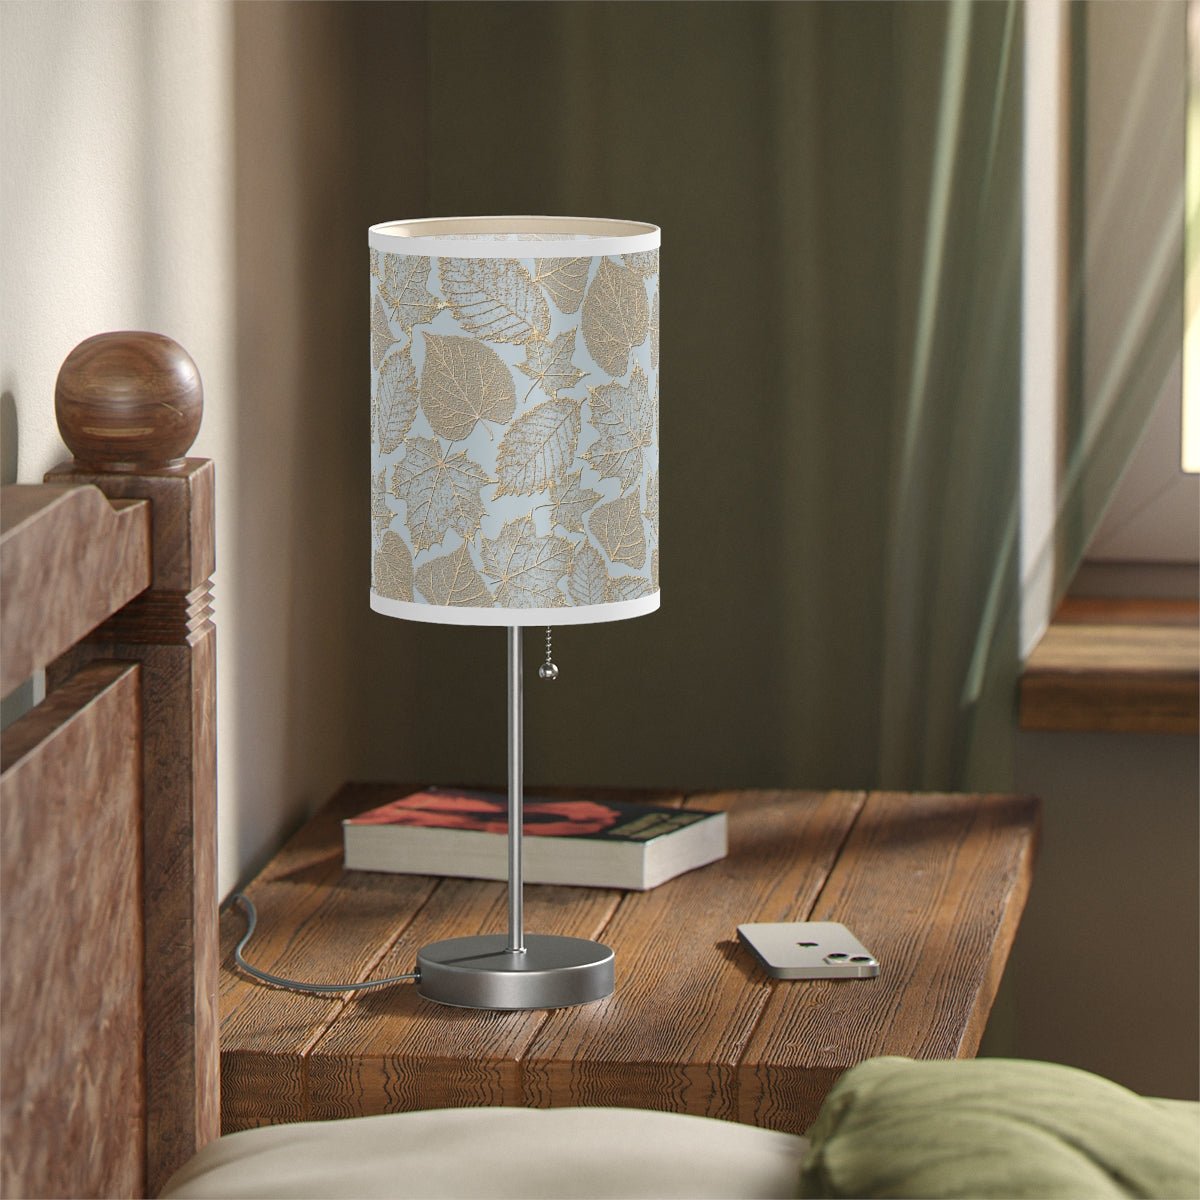 Gold Autumn Maple Leaves Table Lamp - Puffin Lime